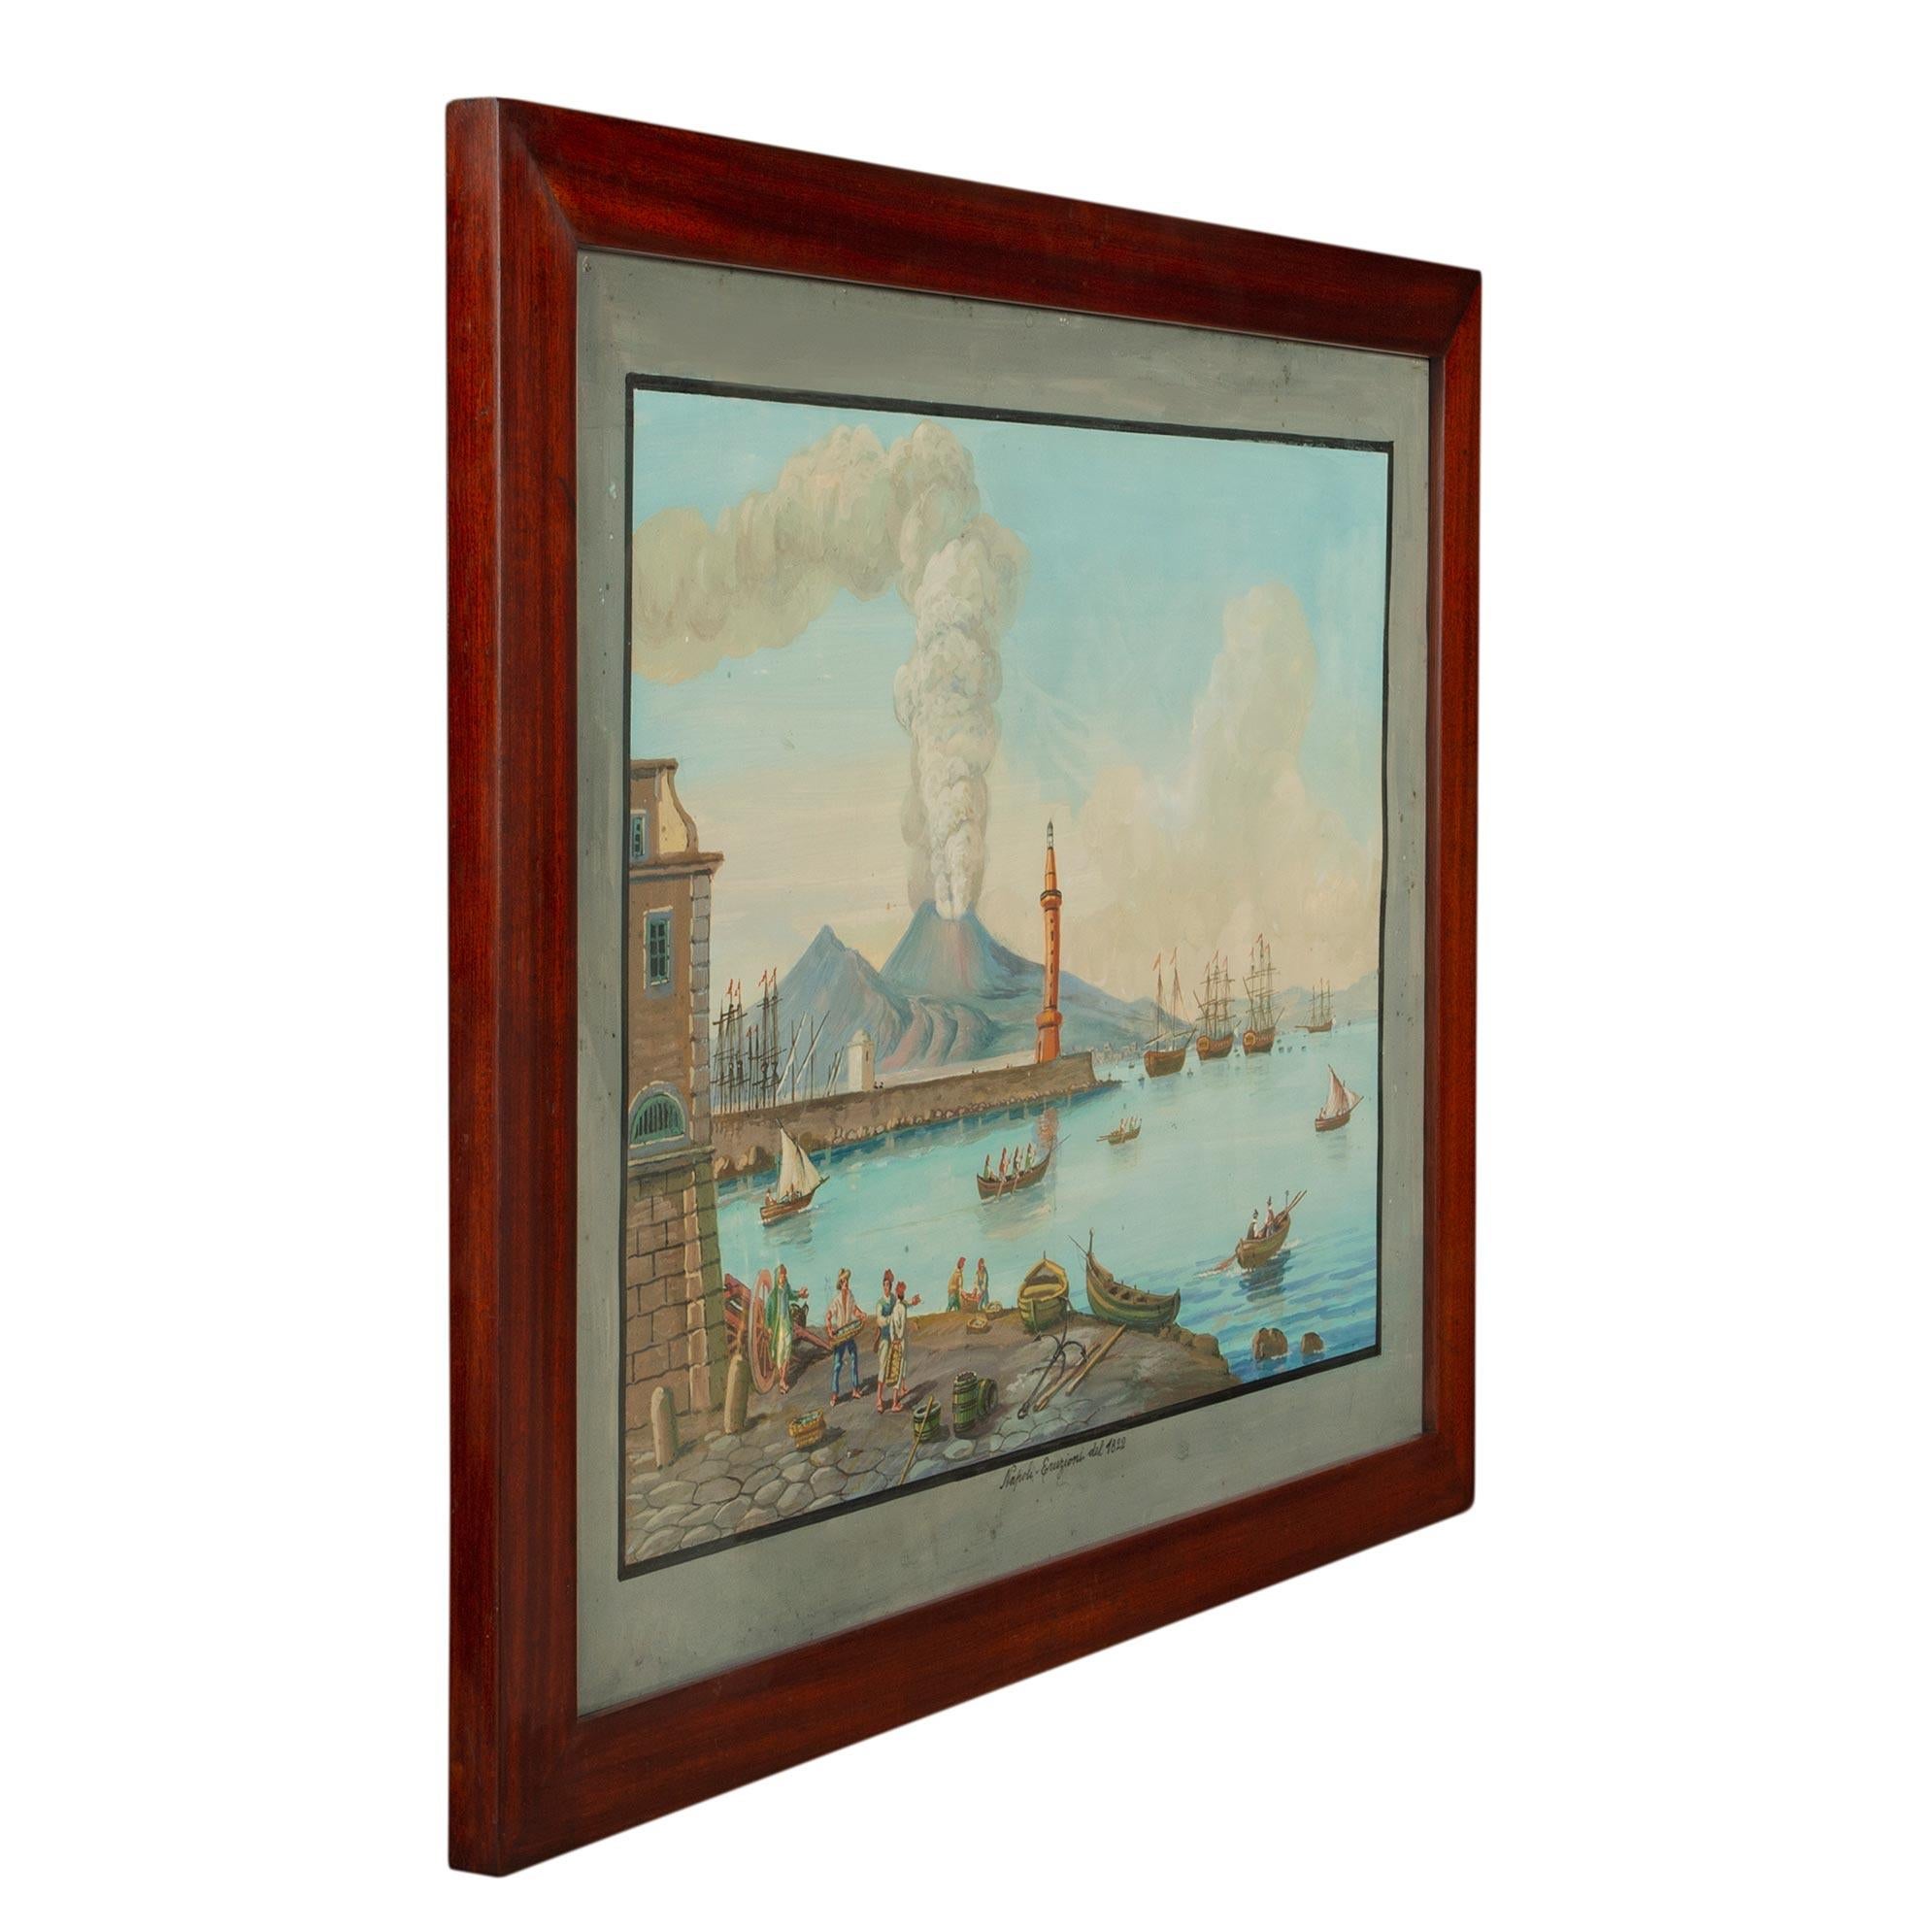 A beautiful pair of Italian 18th century Neapolitan gouaches in 19th century mahogany frames. One depicts the volcano eruption of 1822 in Naples, the other is an affluent residential area, in southern Italy, on the coast of the gulf of Napes called